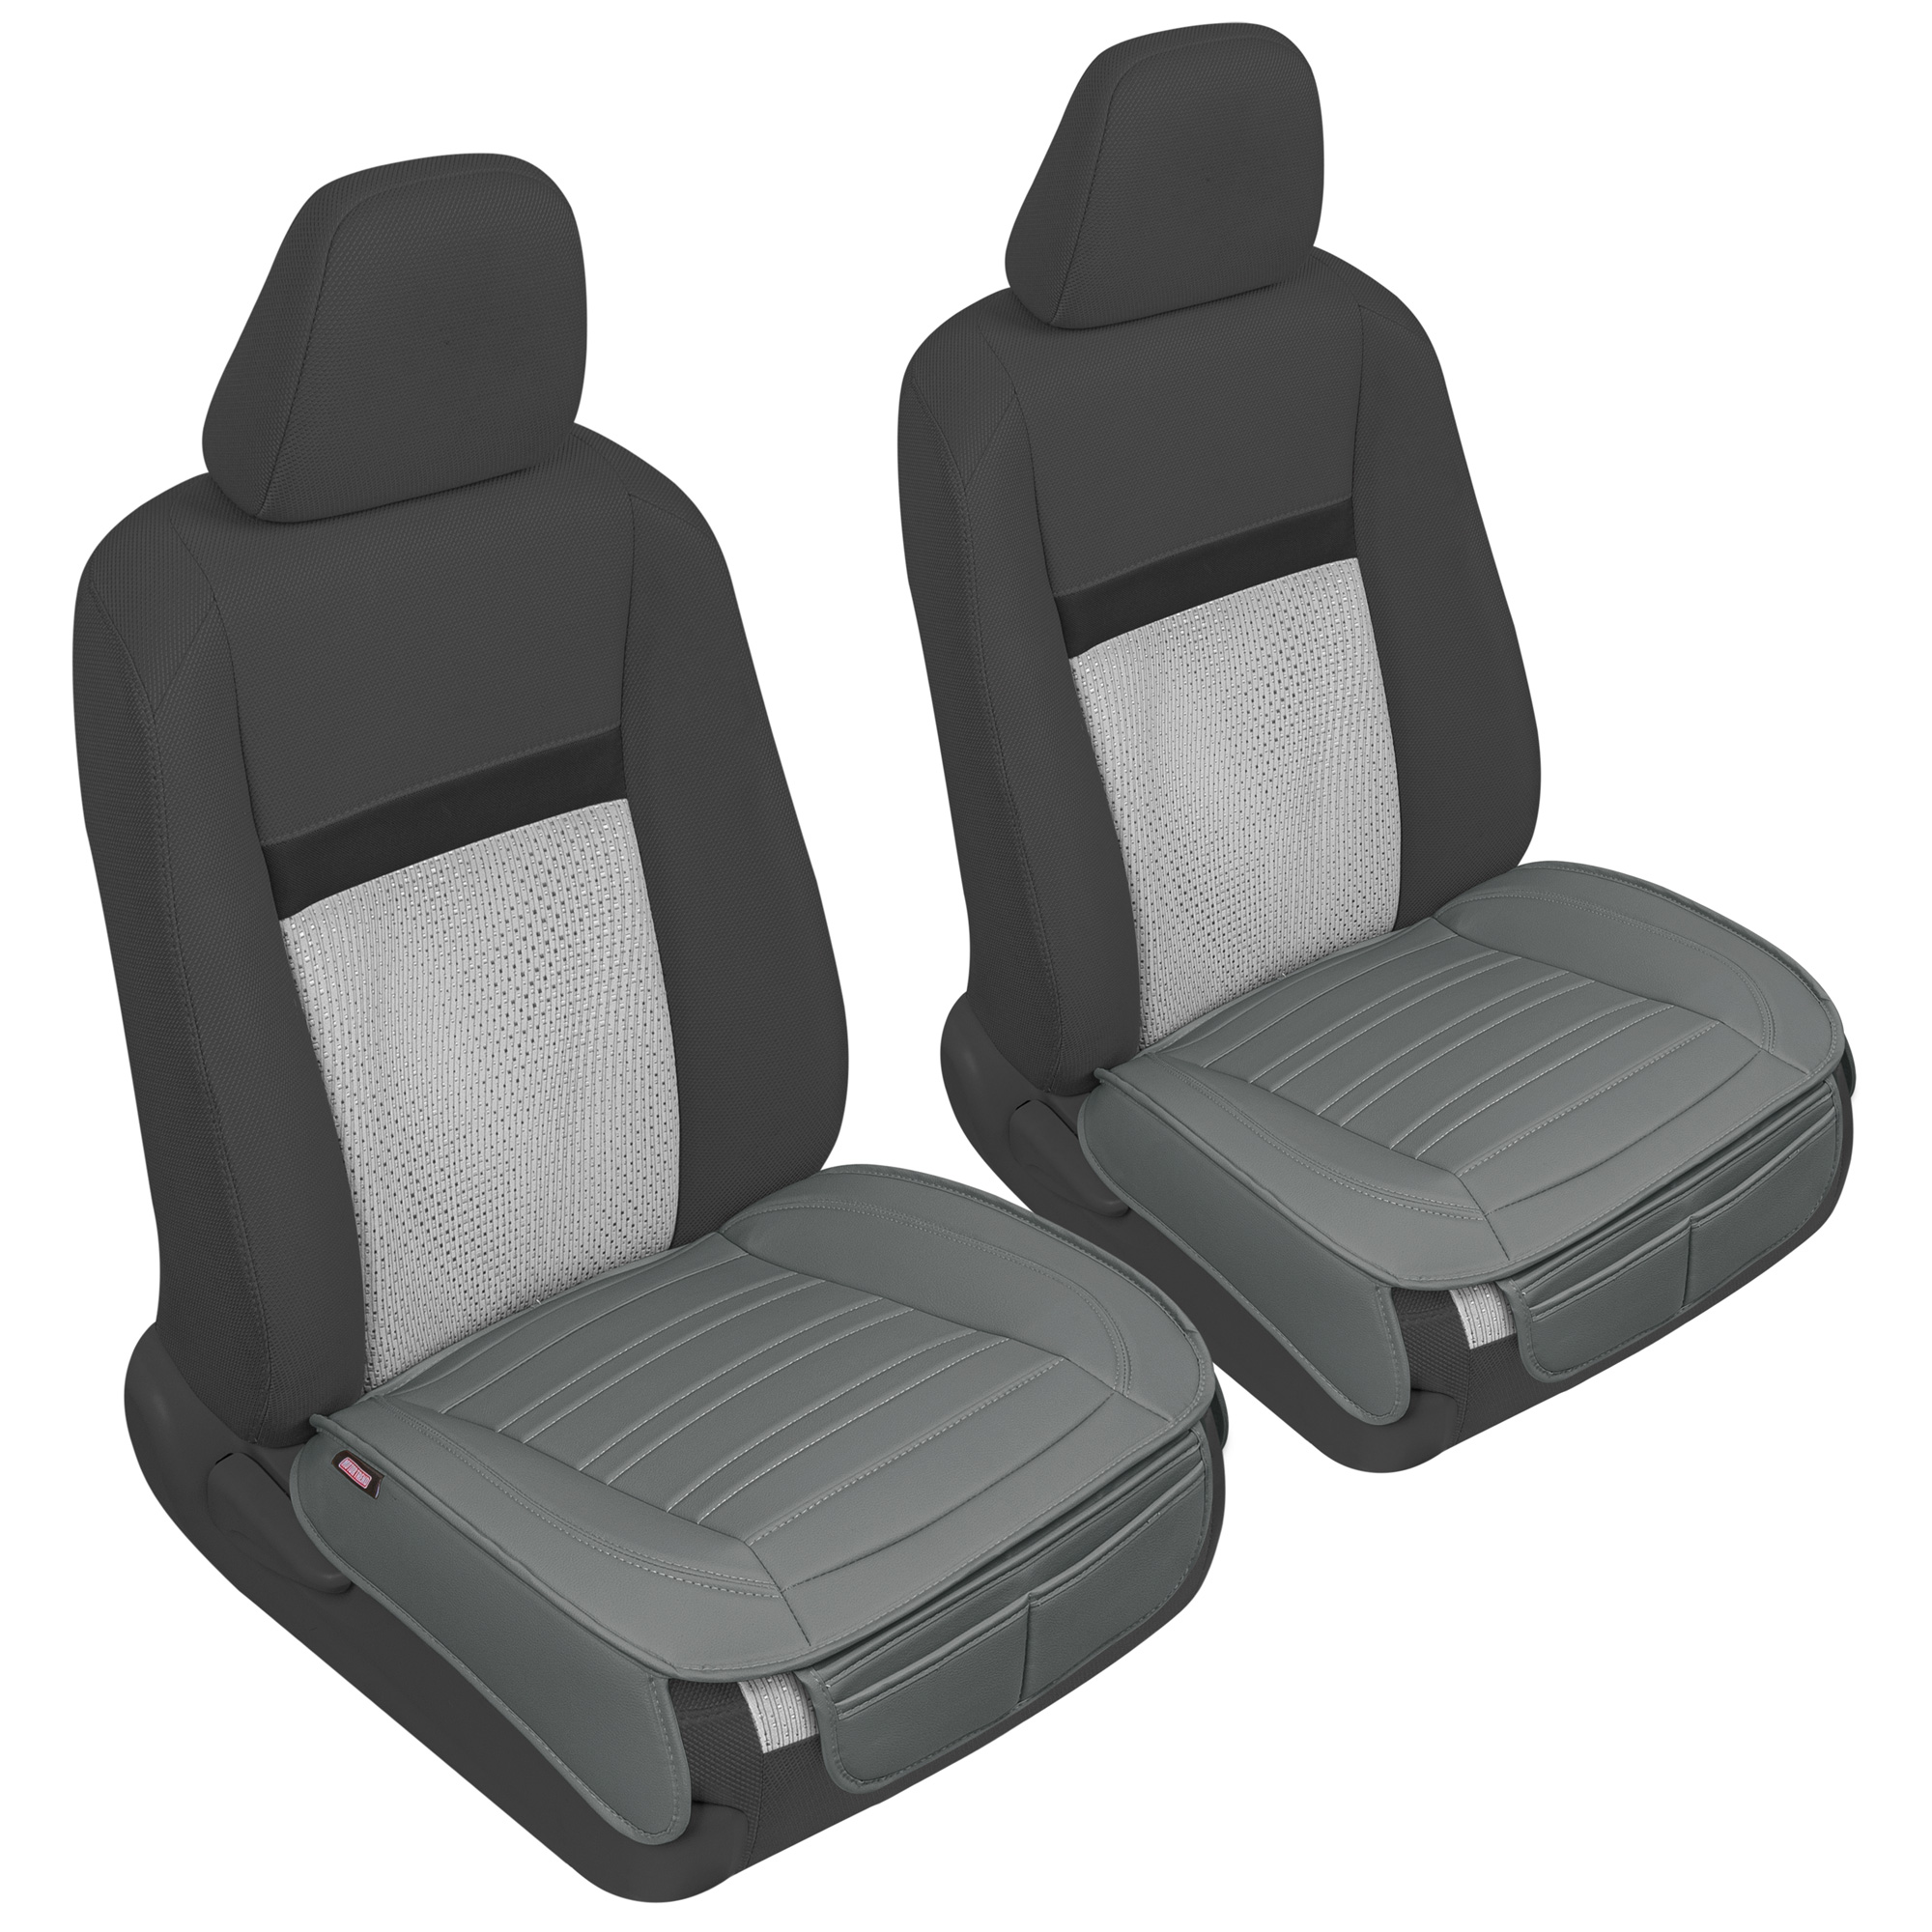 Motor Trend Car Seat Covers for Auto Truck SUV, Gray Faux Leather Front  Seat Covers for Cars, 2-Pack